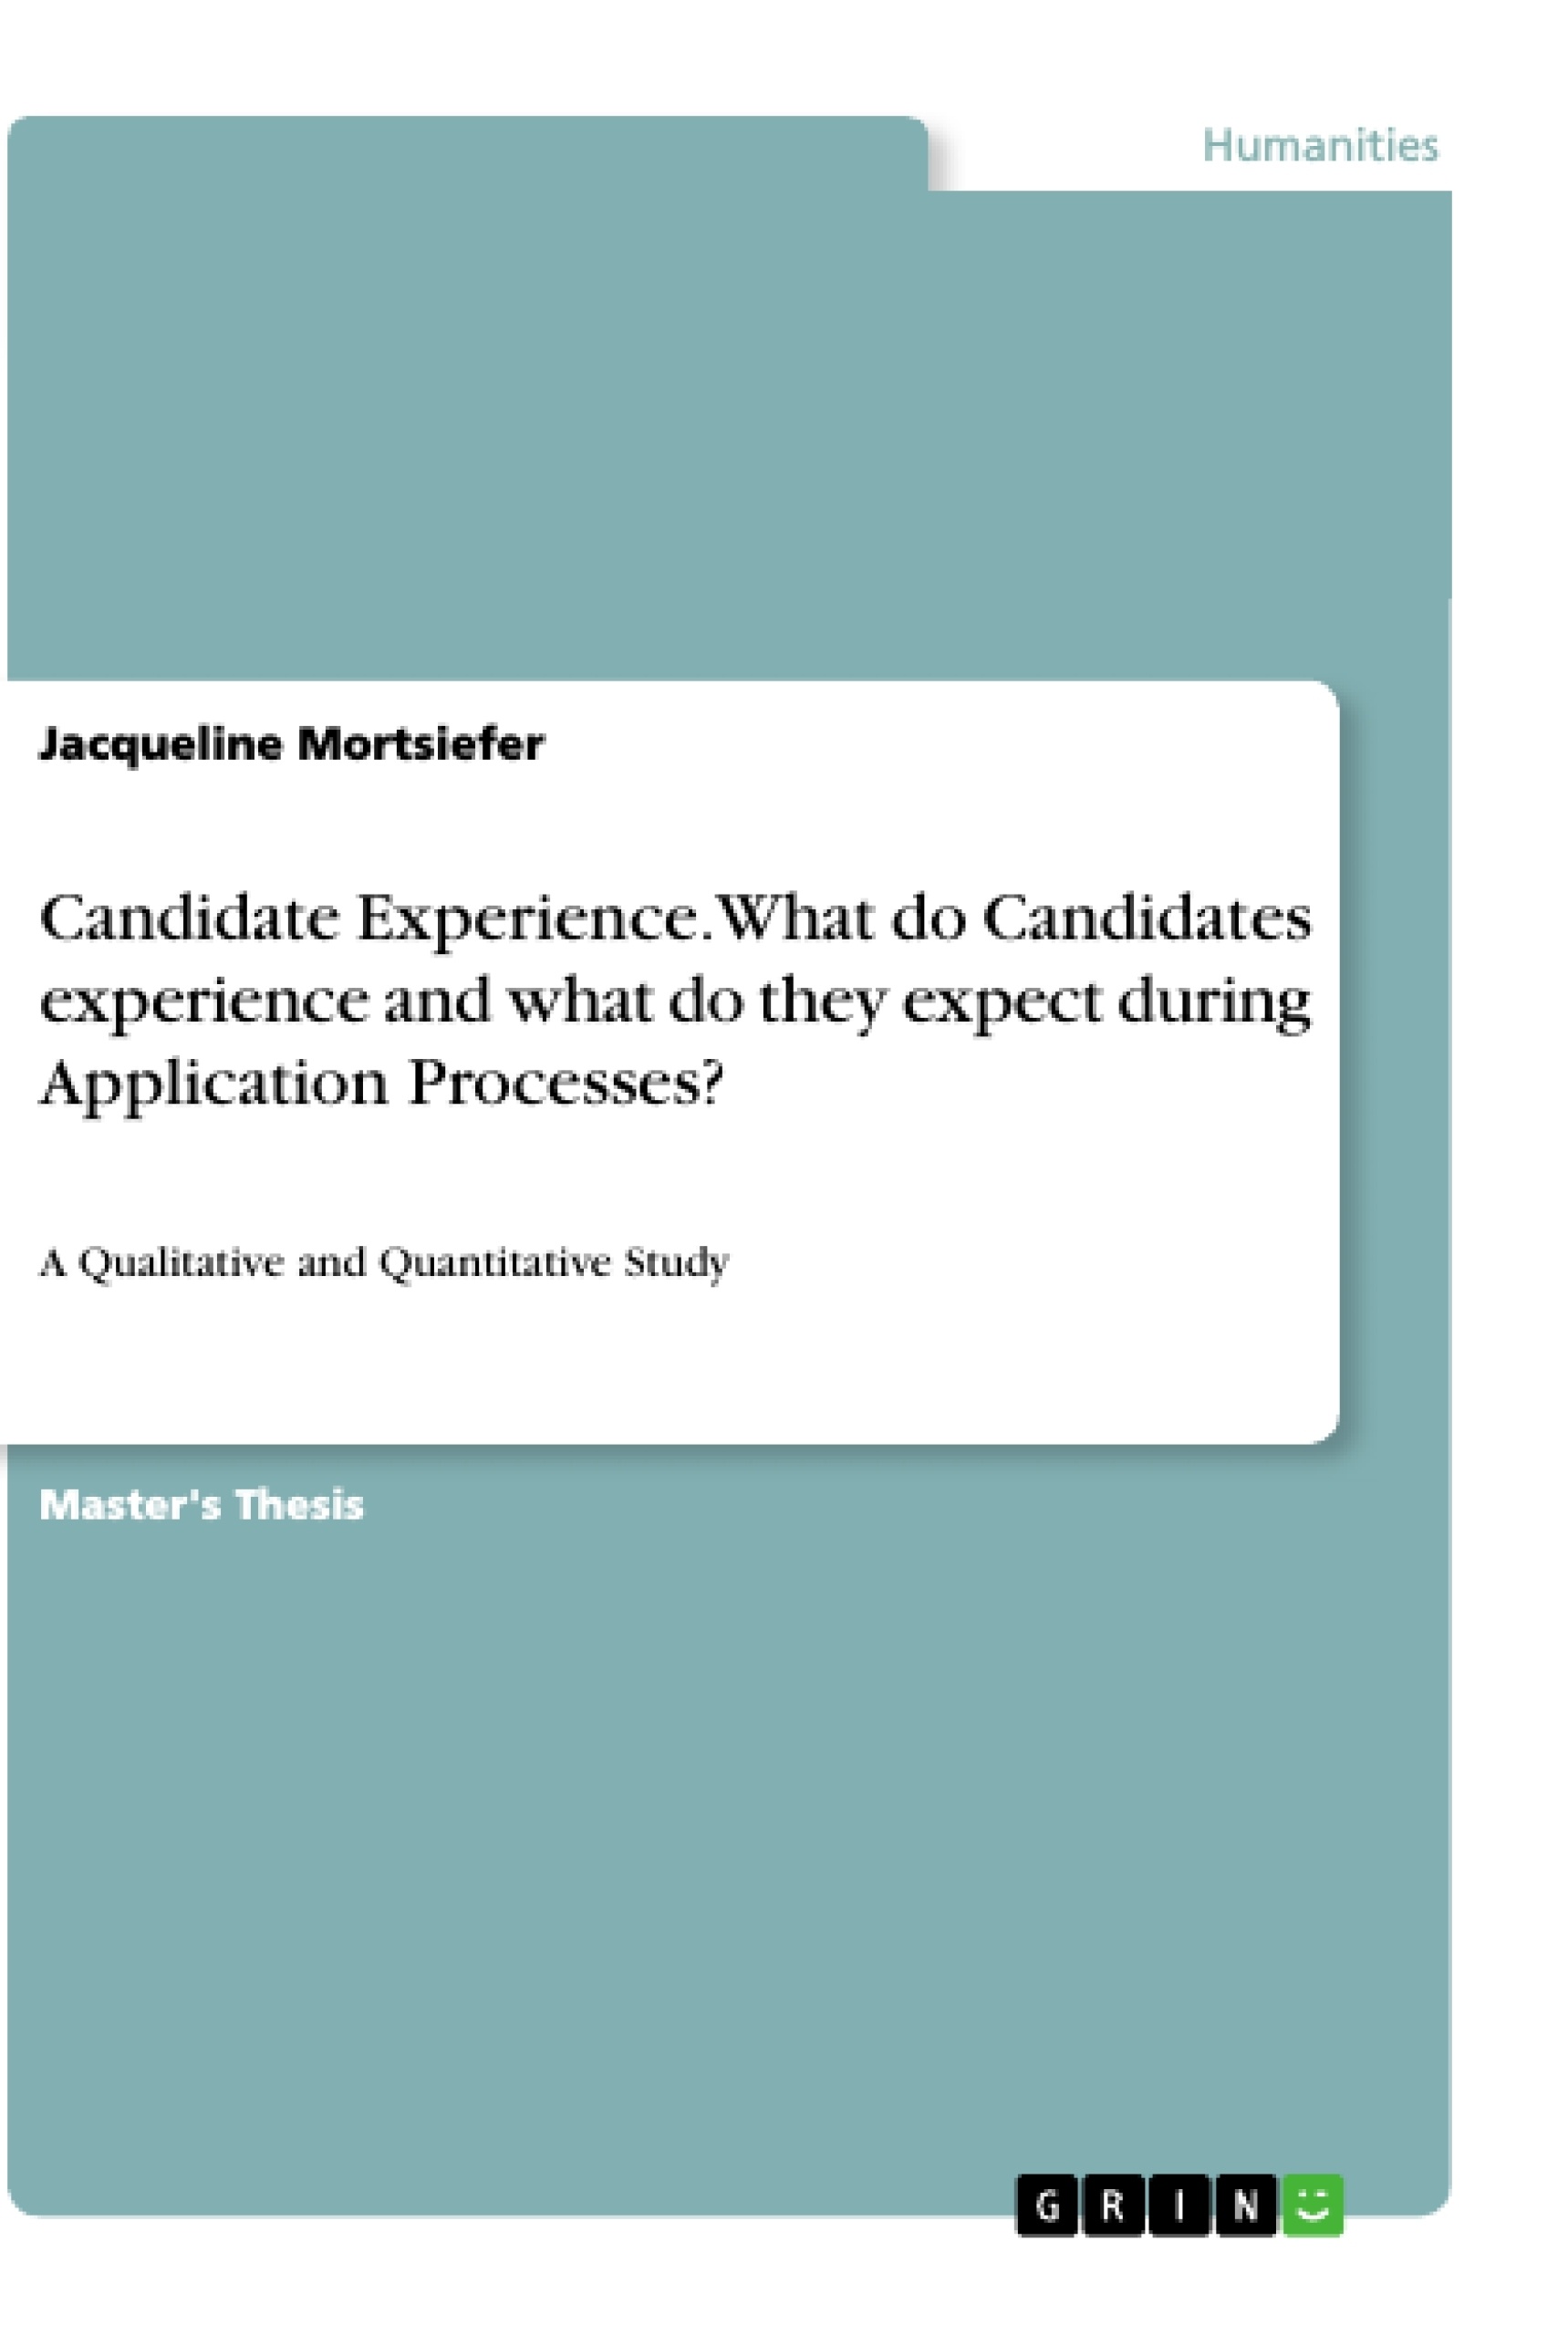 Title: Candidate Experience. What do Candidates experience and what do they expect during Application Processes?